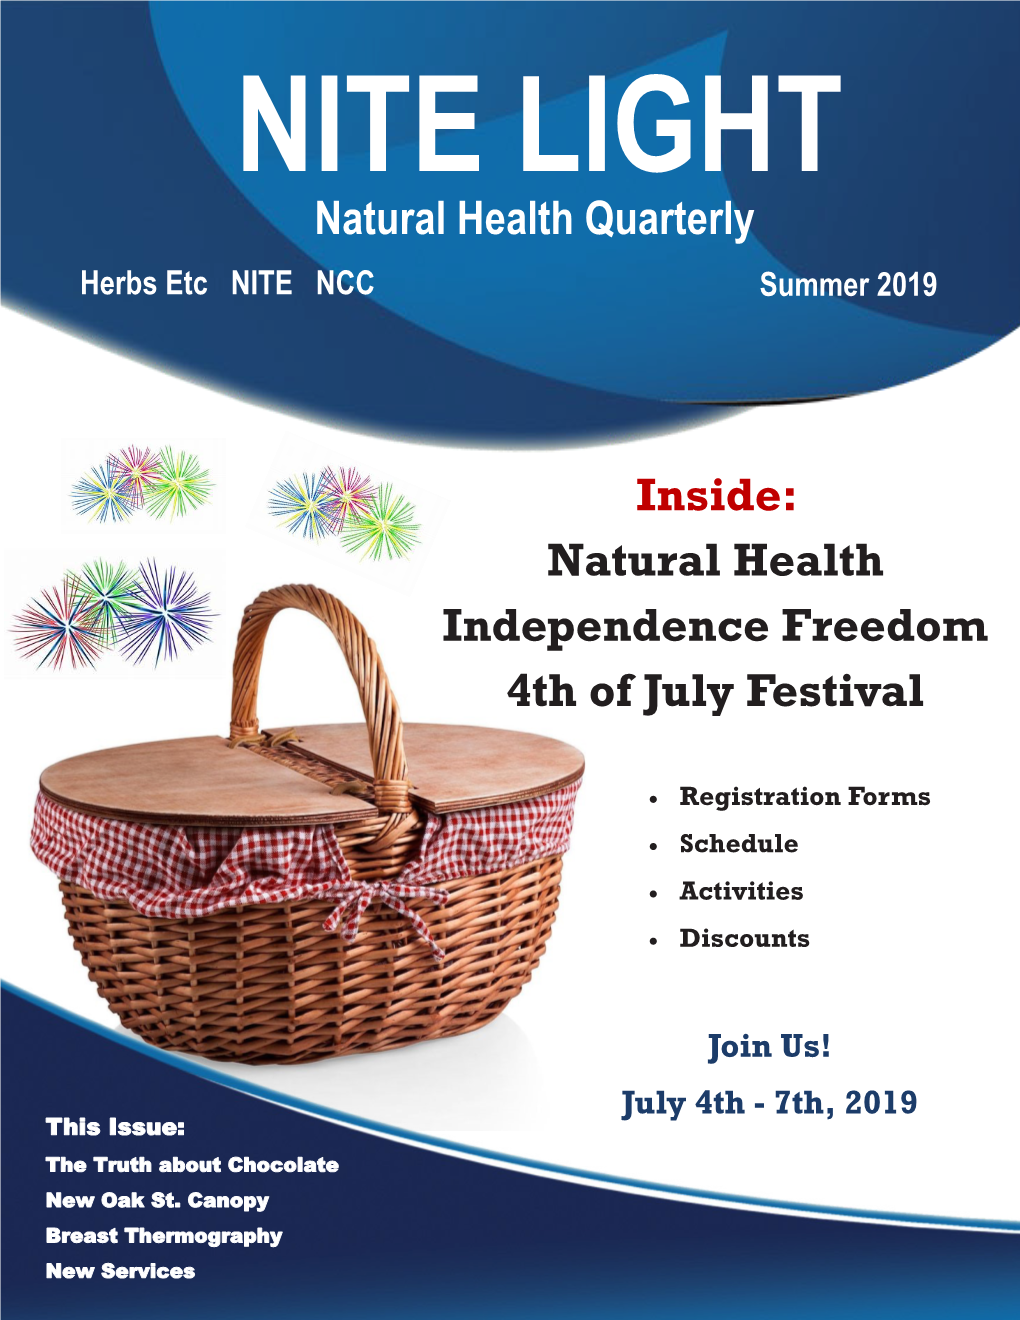 Natural Health Independence Freedom 4Th of July Festival